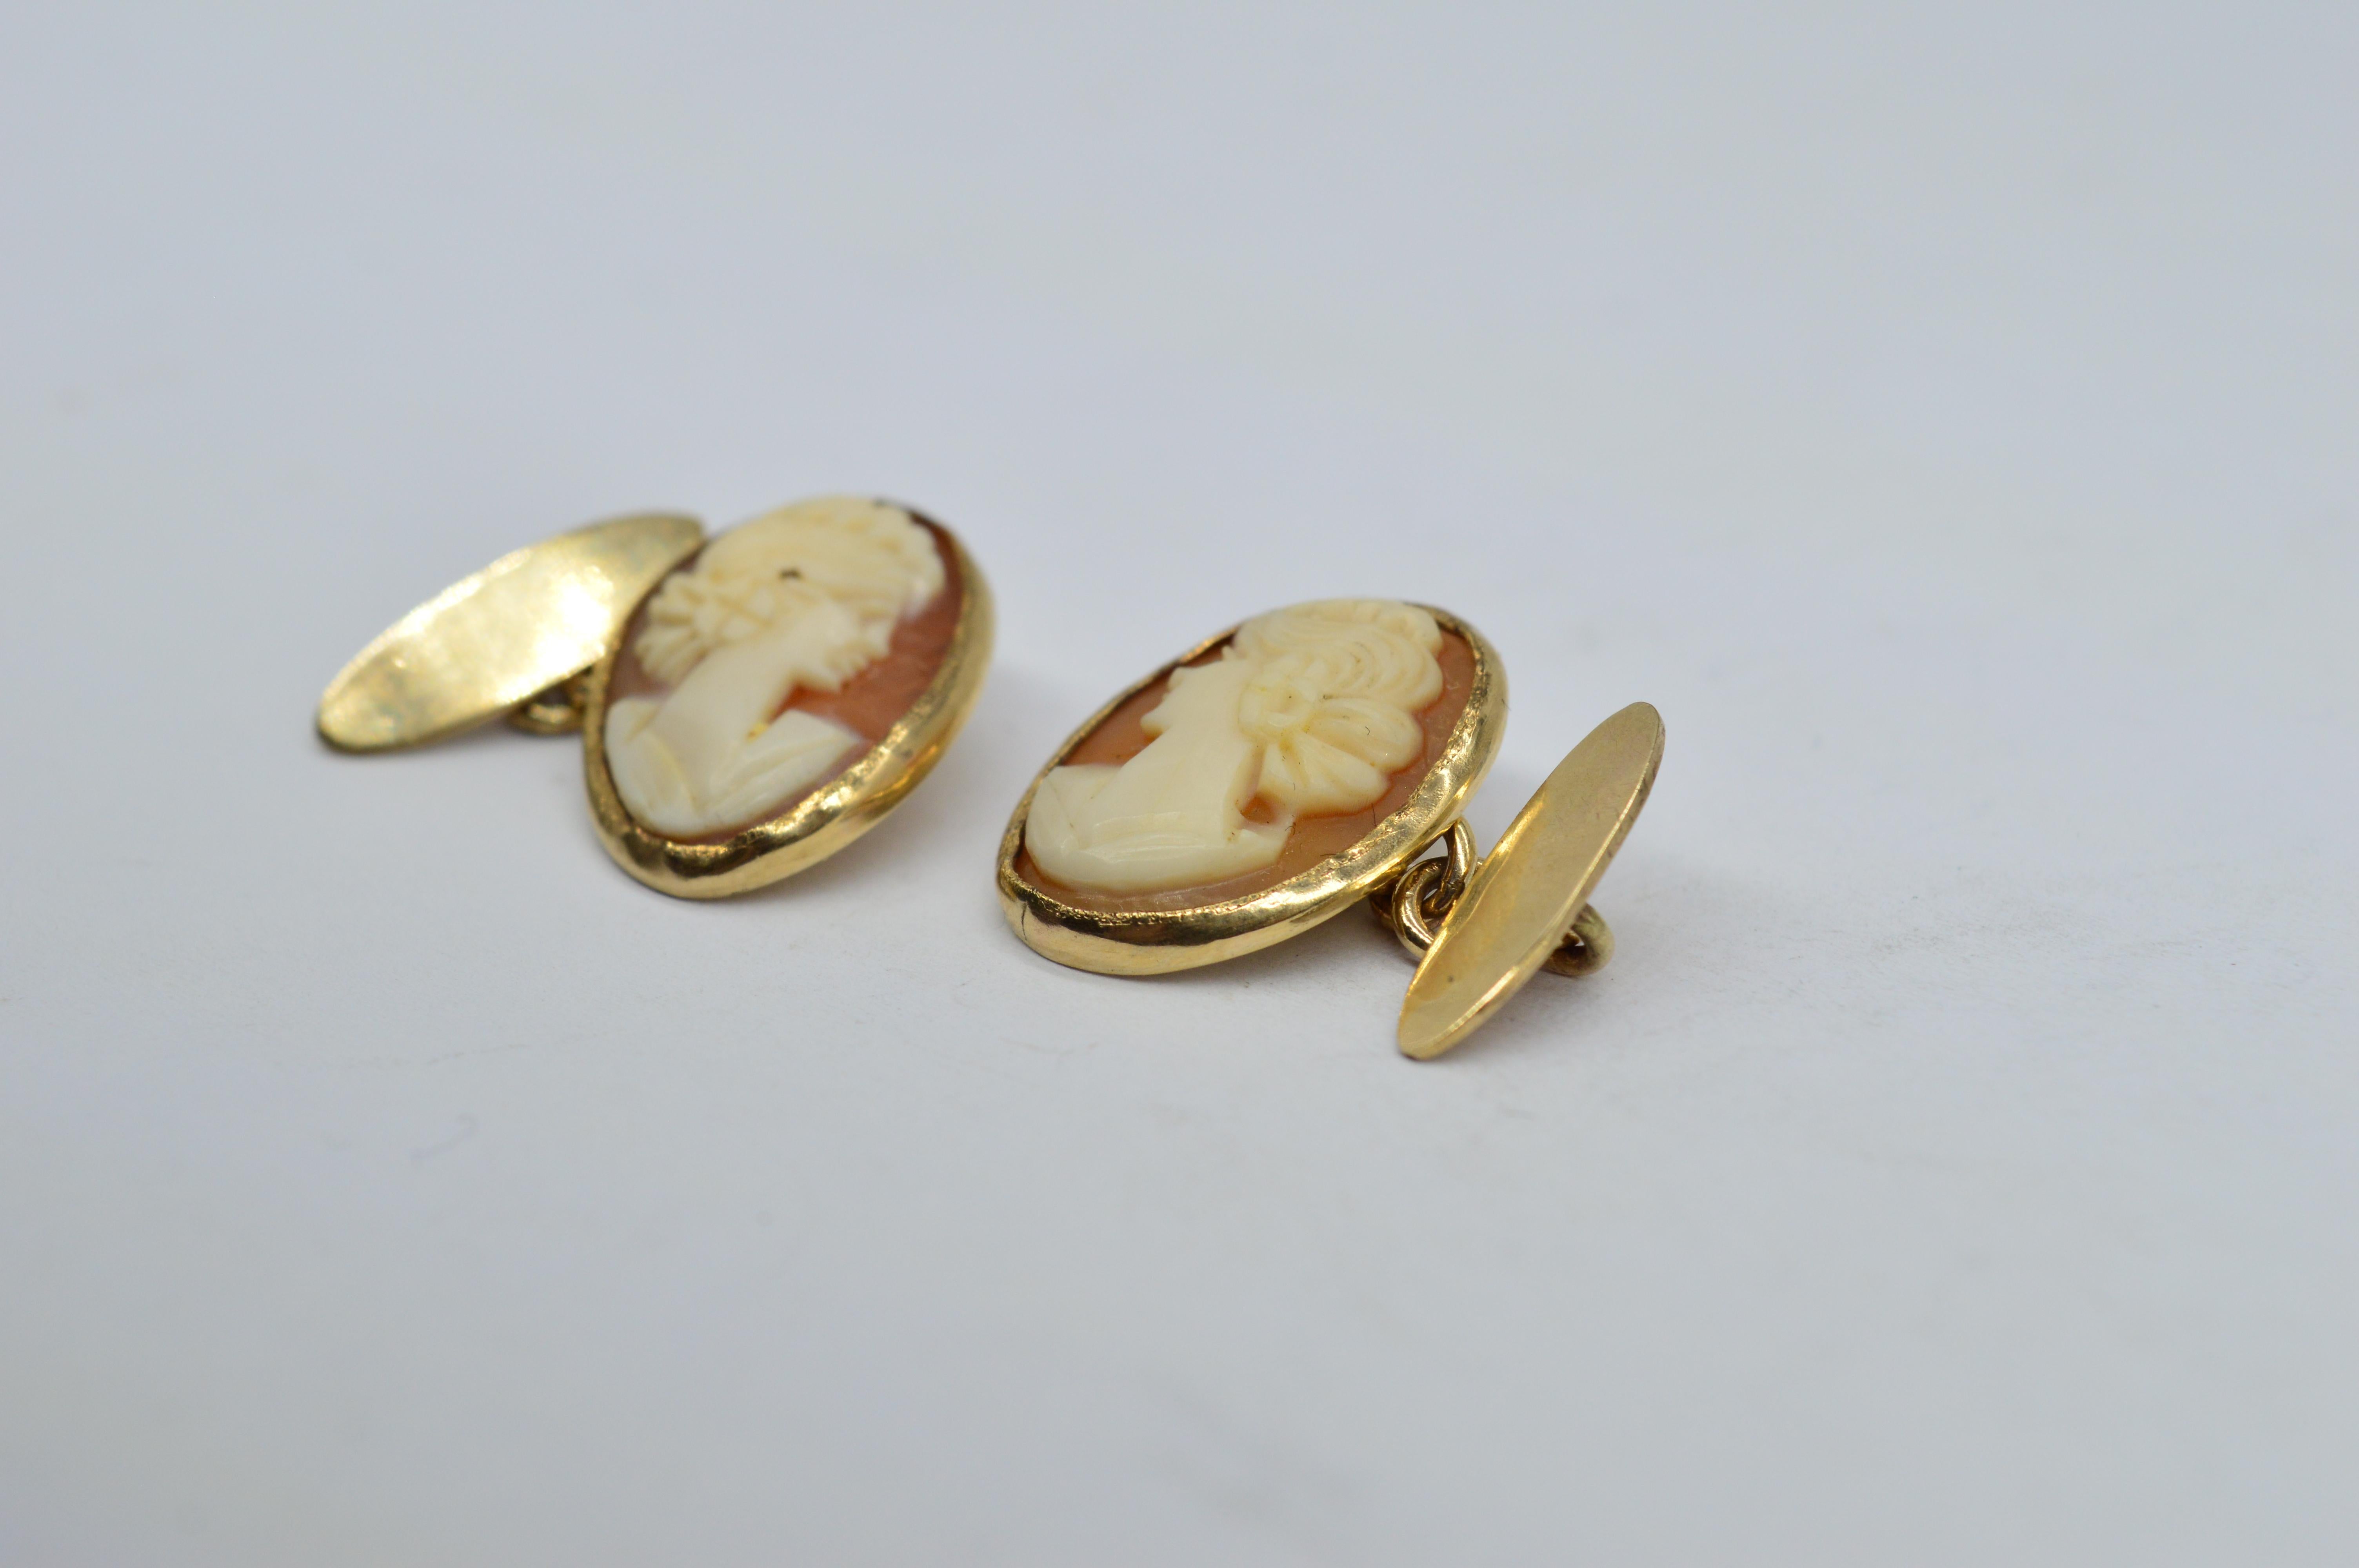 A set of vintage 9ct yellow gold cufflinks made with handcrafted shell cameo's

The cameo depicts a Victorian lady

We have sold to the set of Hit shows like Peaky Blinders and Outlander as well as to Buckingham Palace so our items are truly fit for